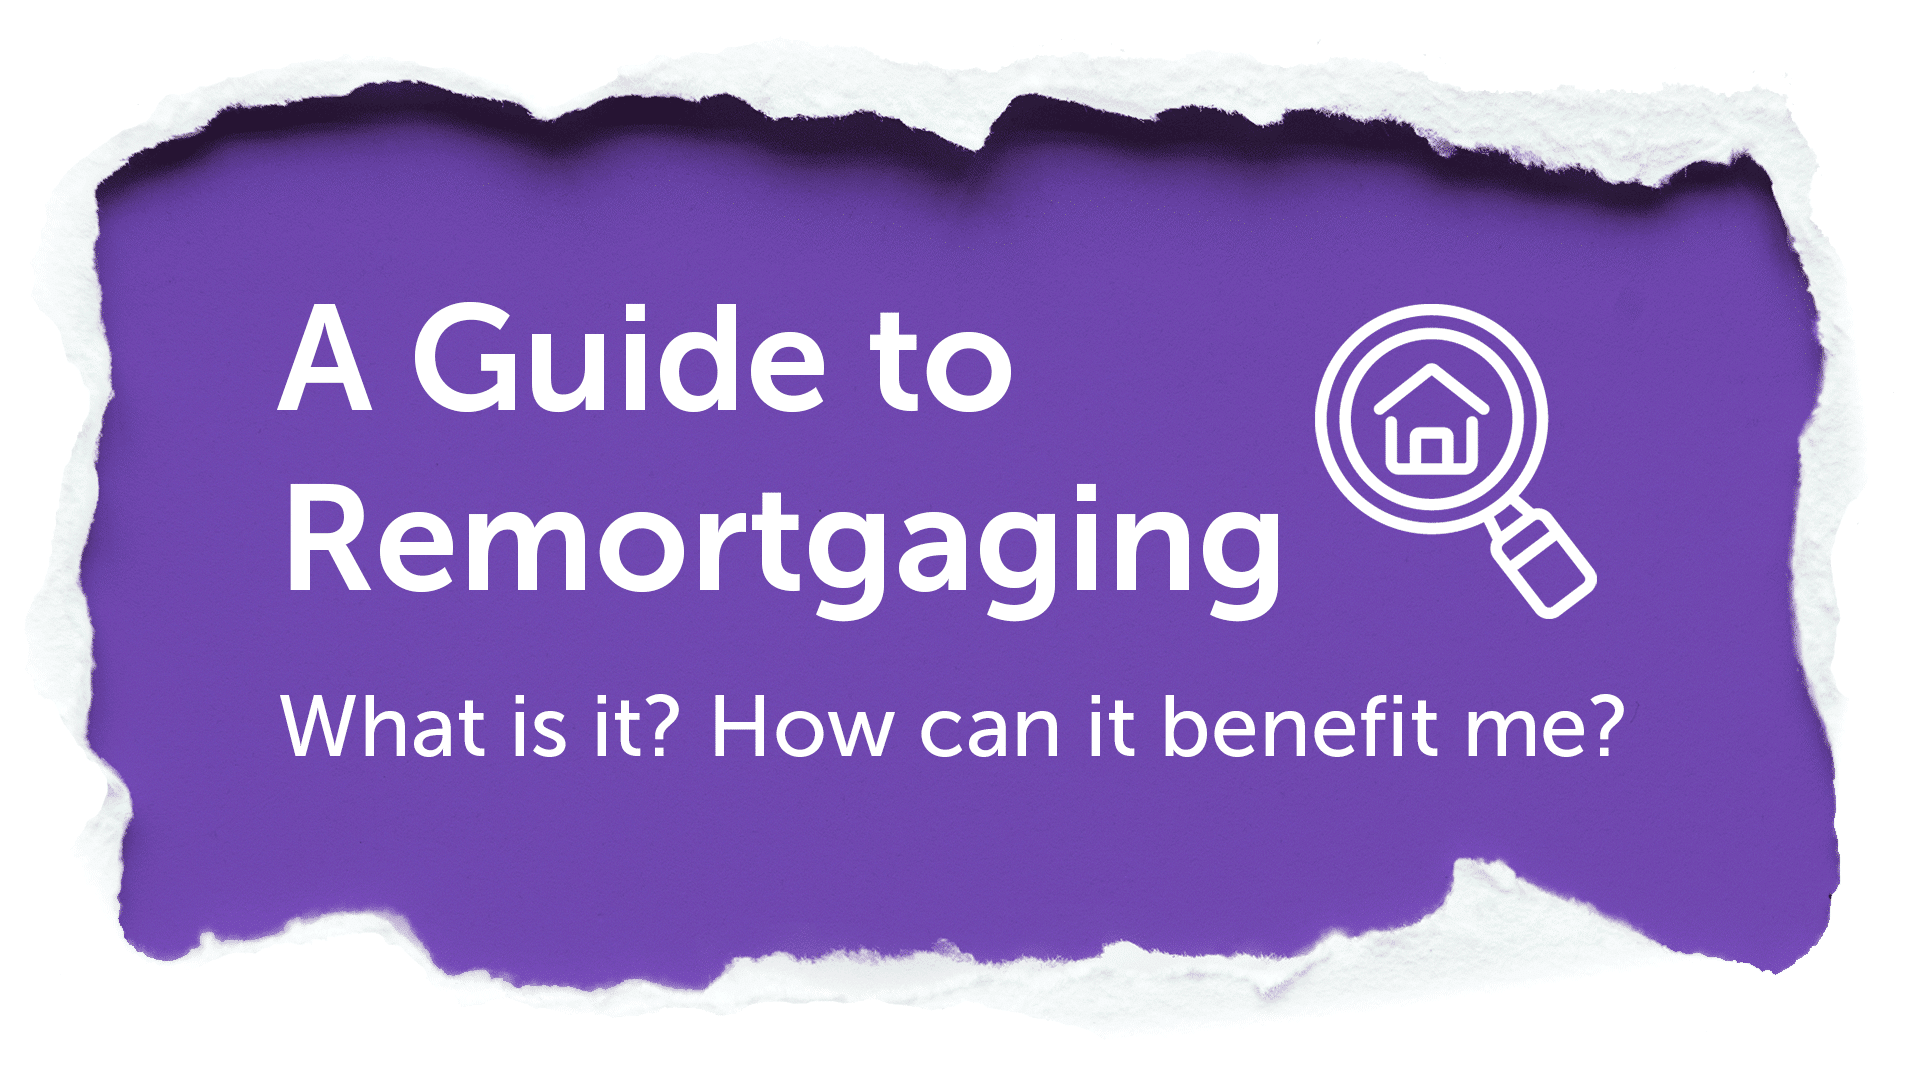 A Guide to Remortgaging in Birmingham